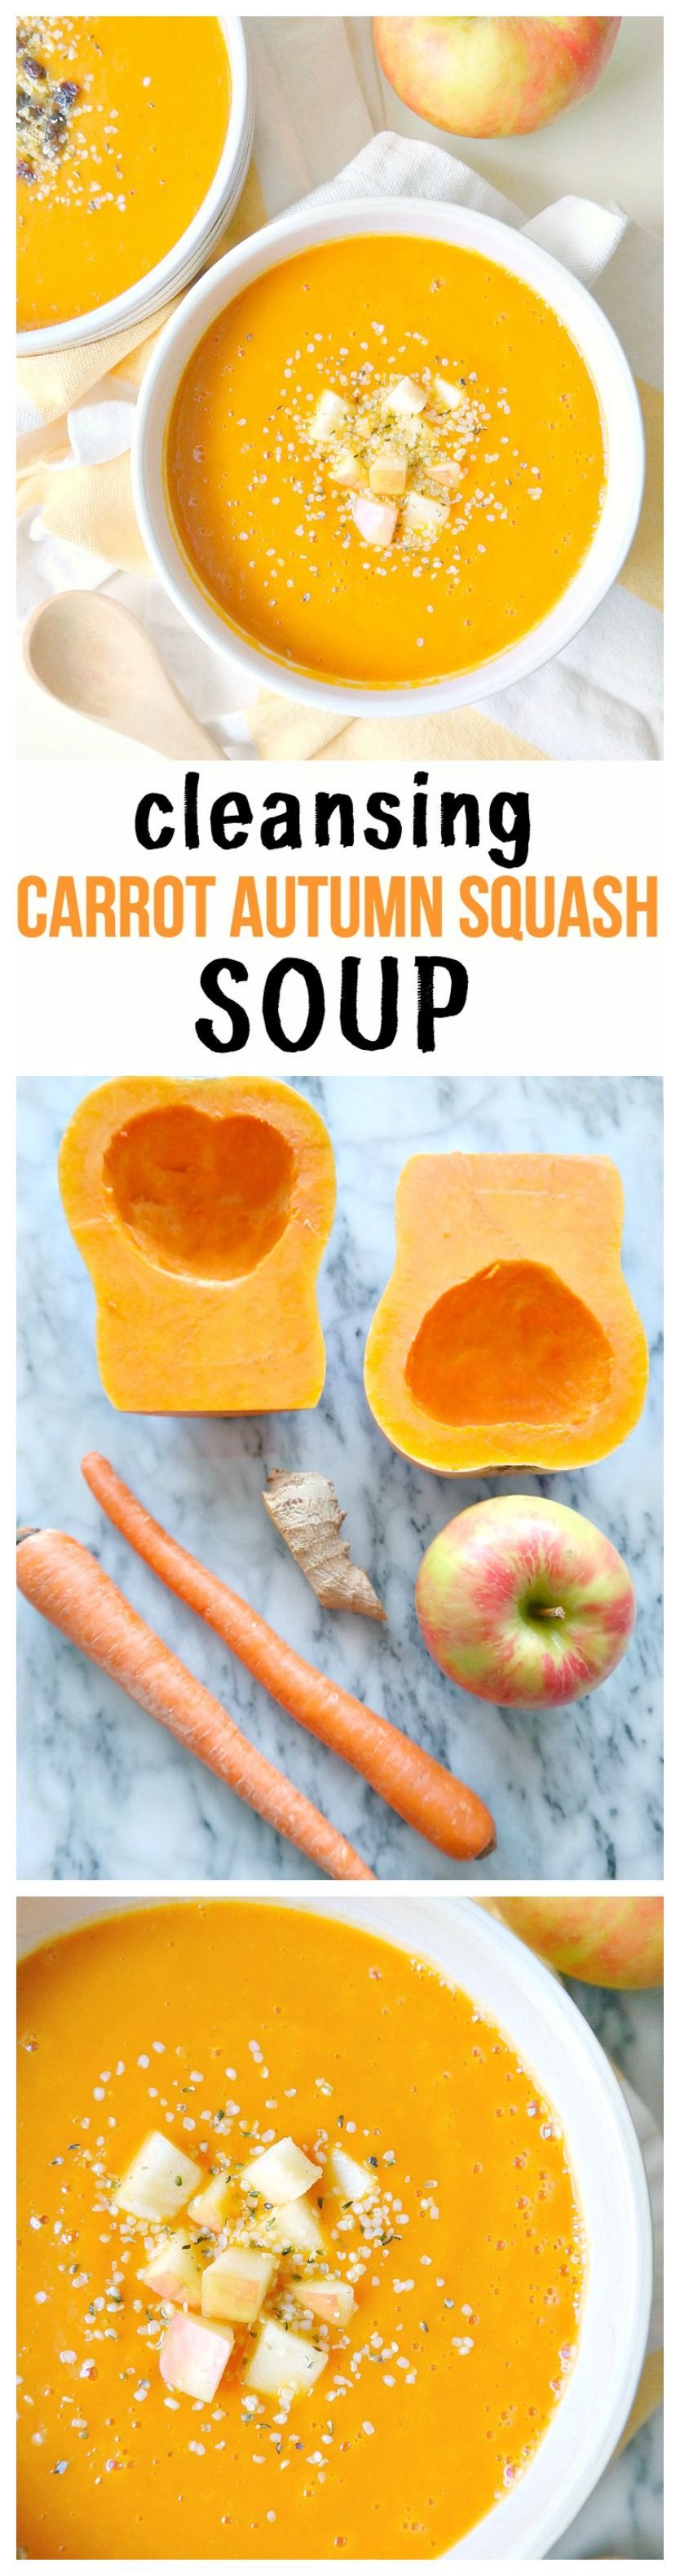 Cleansing Carrot Autumn Squash Soup – vegan, gluten-free, oil-free, low-fat and im